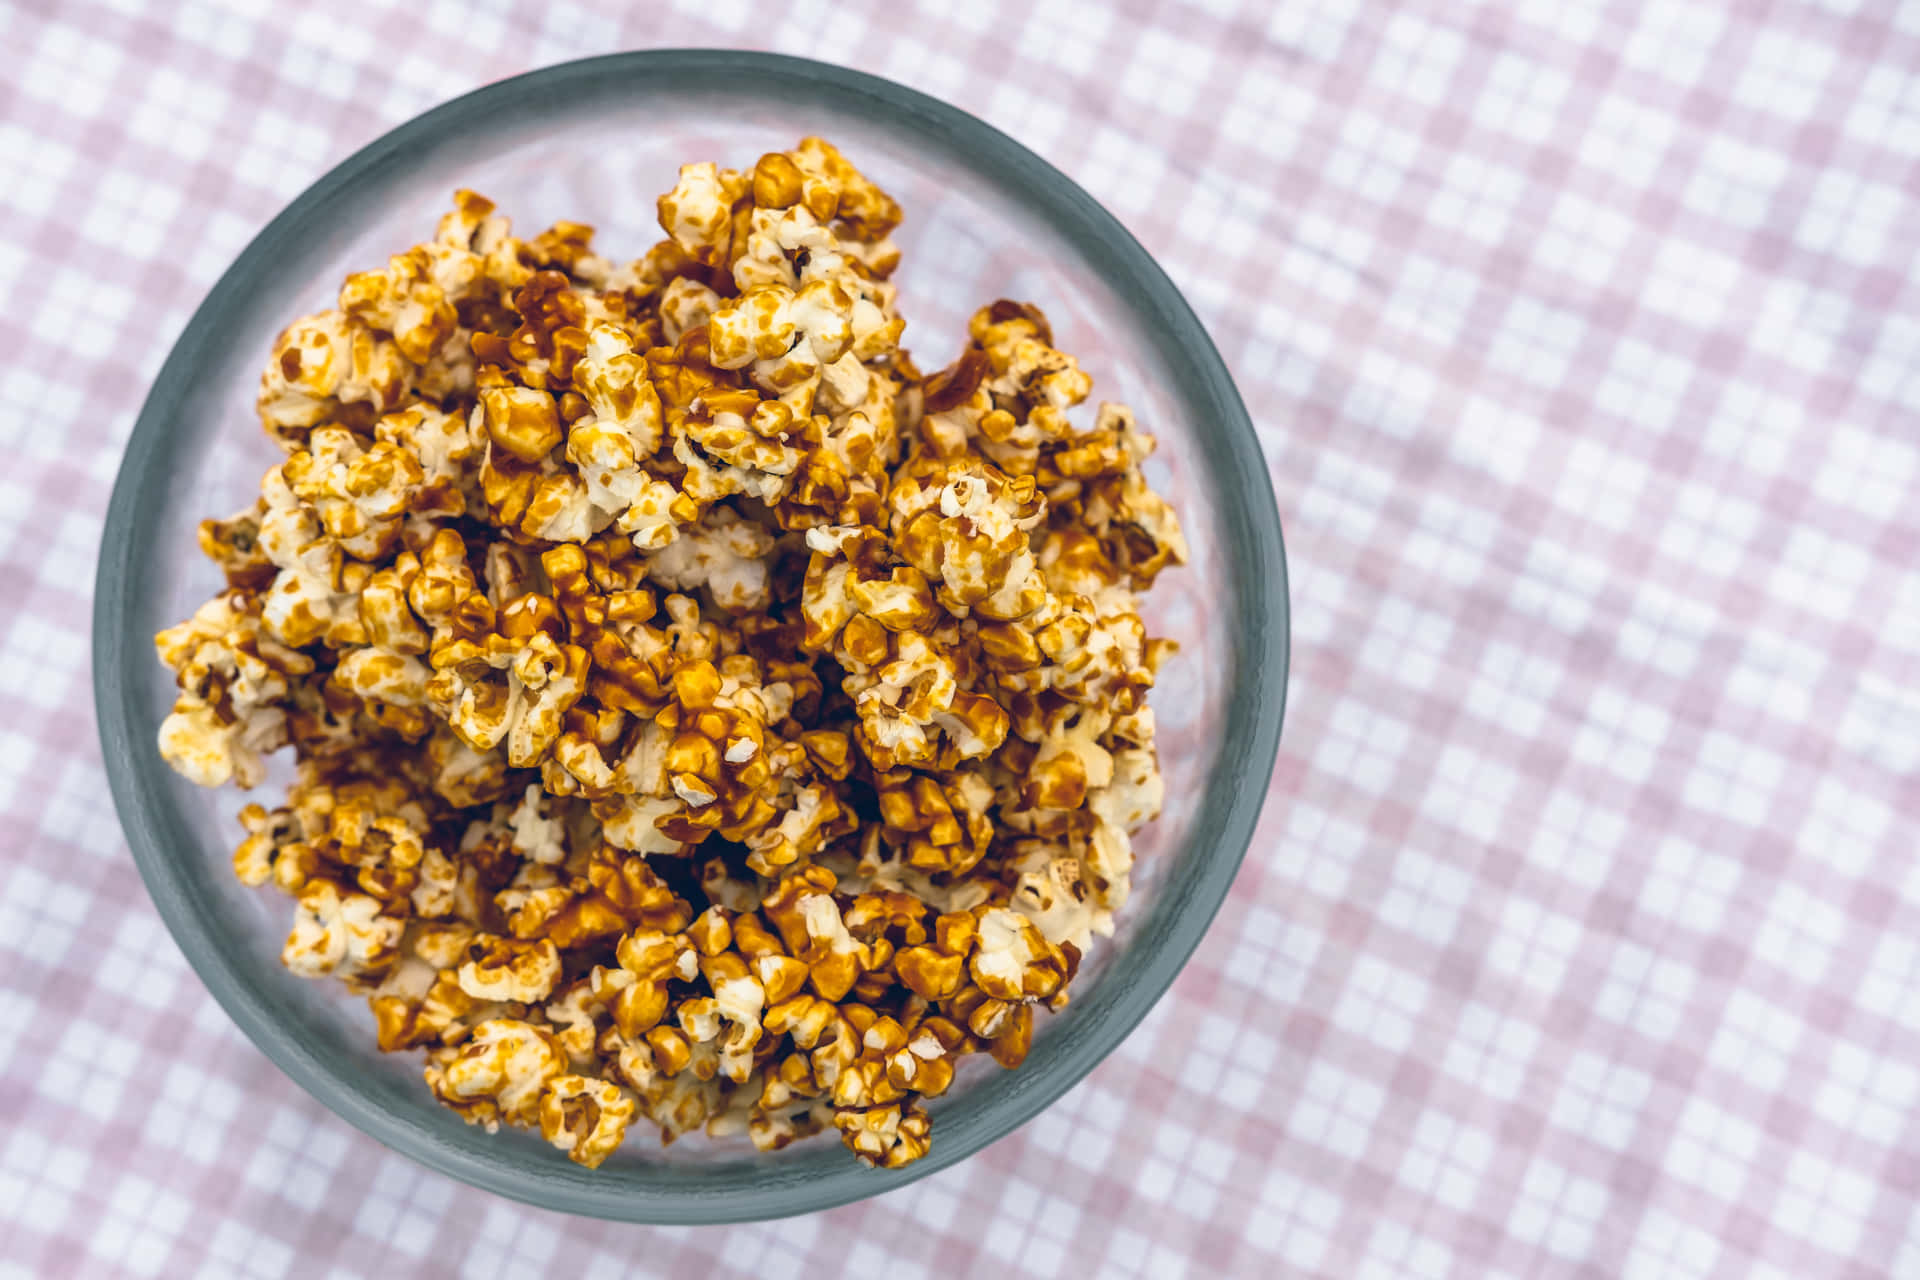 Ready for movie night? Load up on flavorful Popcorn snack!